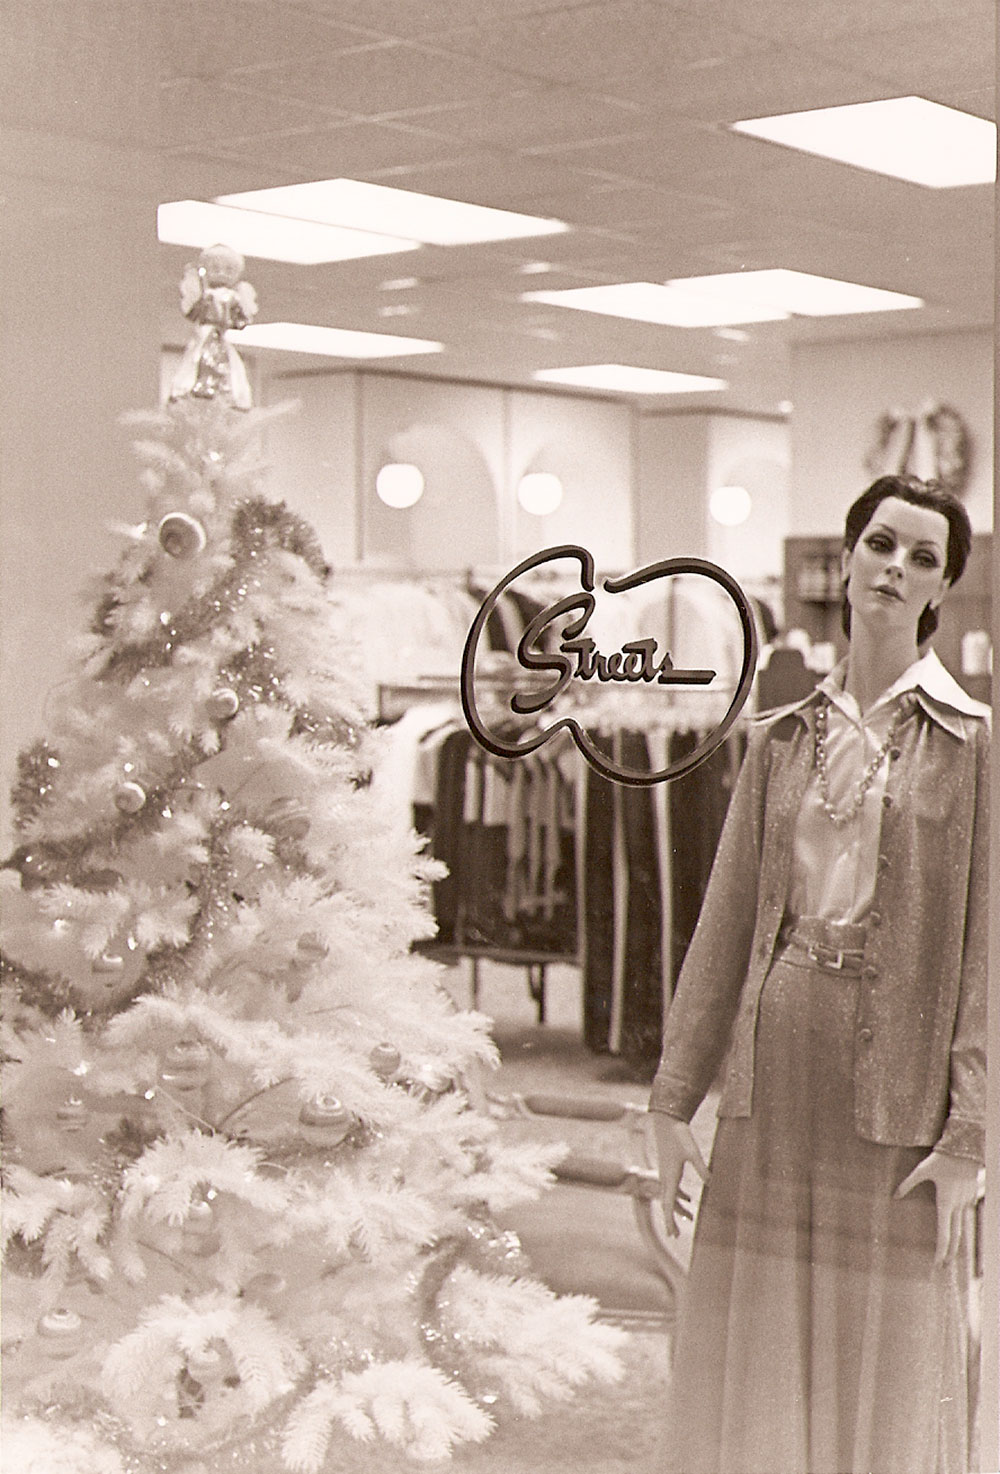 (FNB.2010.15.02) - Christmas Display, Streets Department Store, First National Center, 120 Park Ave, c. 1972